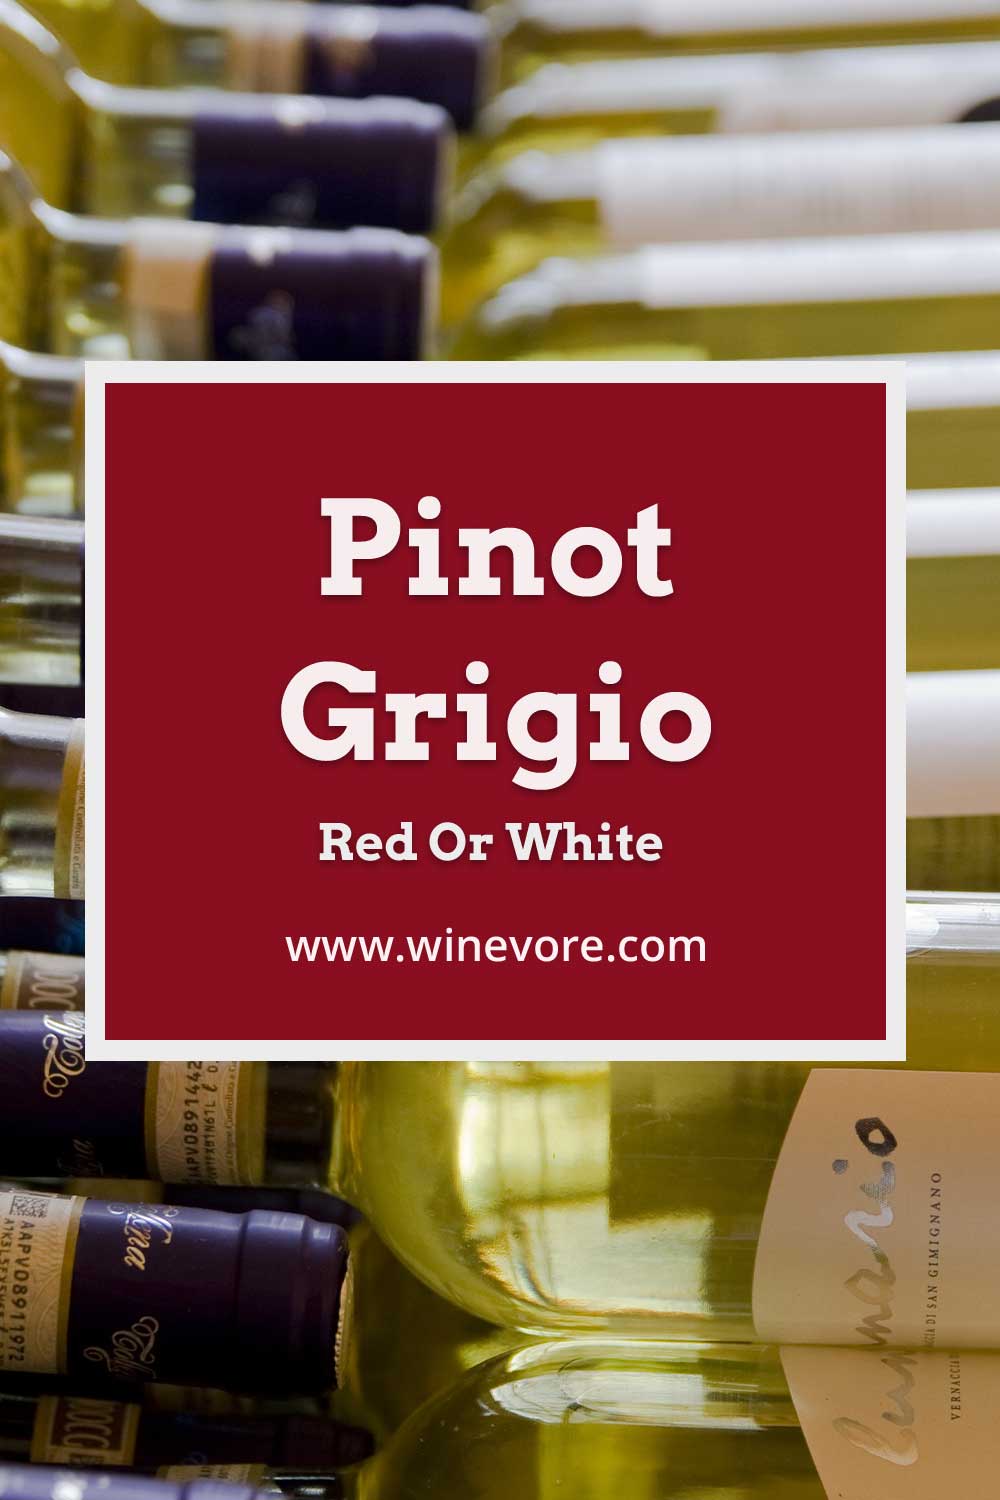 Some intake bottles of white wine - Pinot Grigio Red Or White?